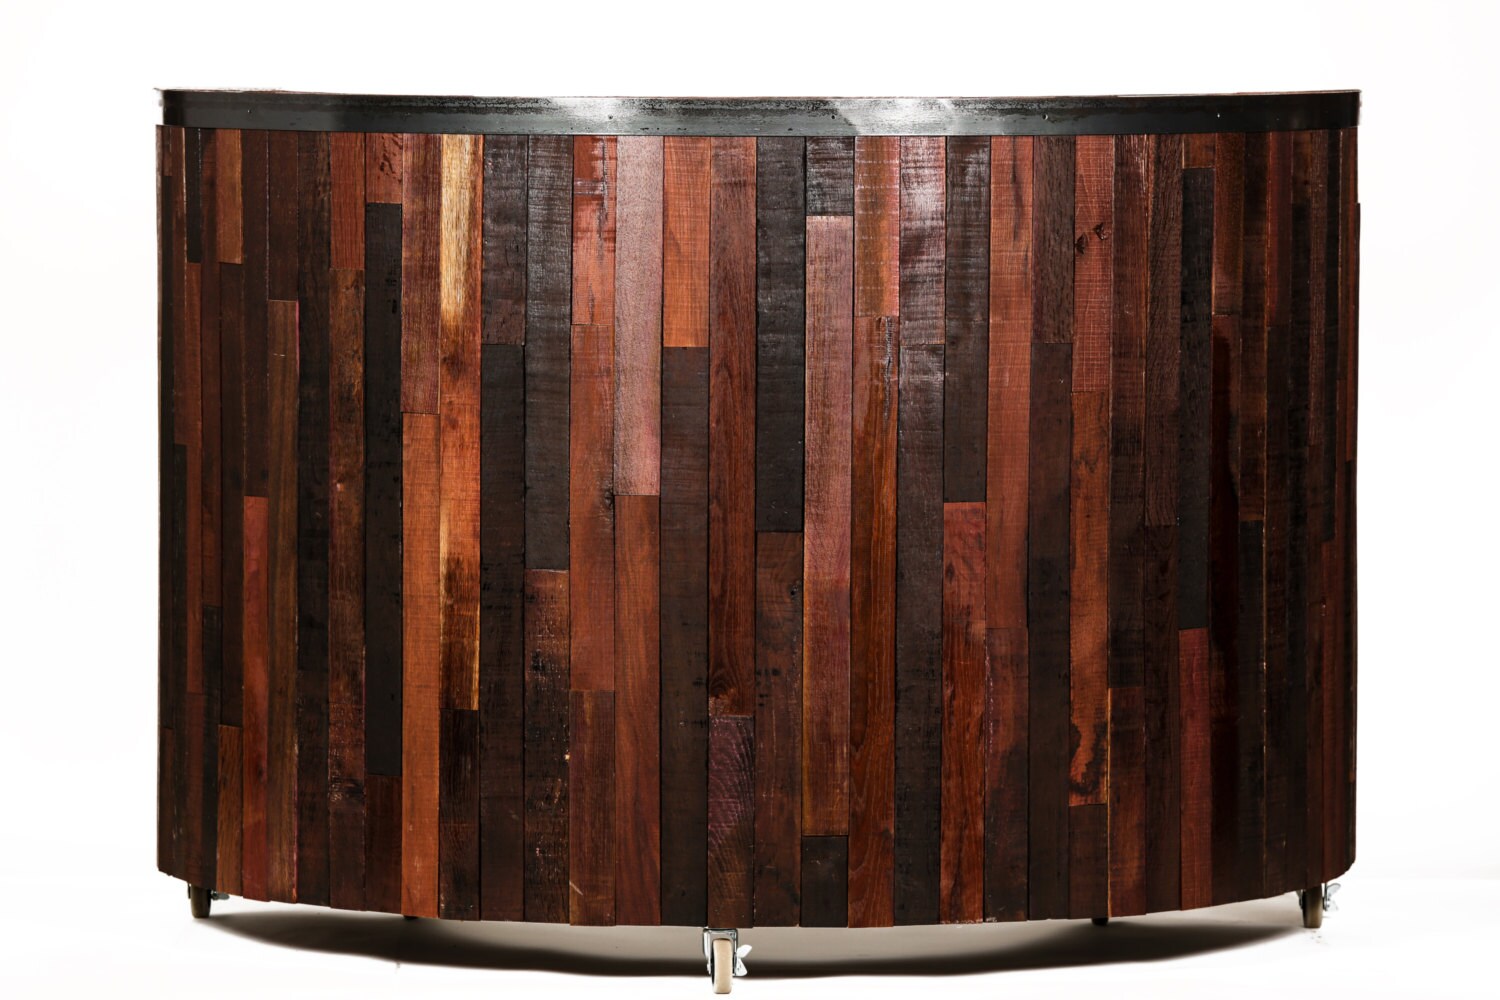 Wine Barrel Curved Bar Hostess Stand - Recurve - Made from retired California wine barrels. 100% Recycled!